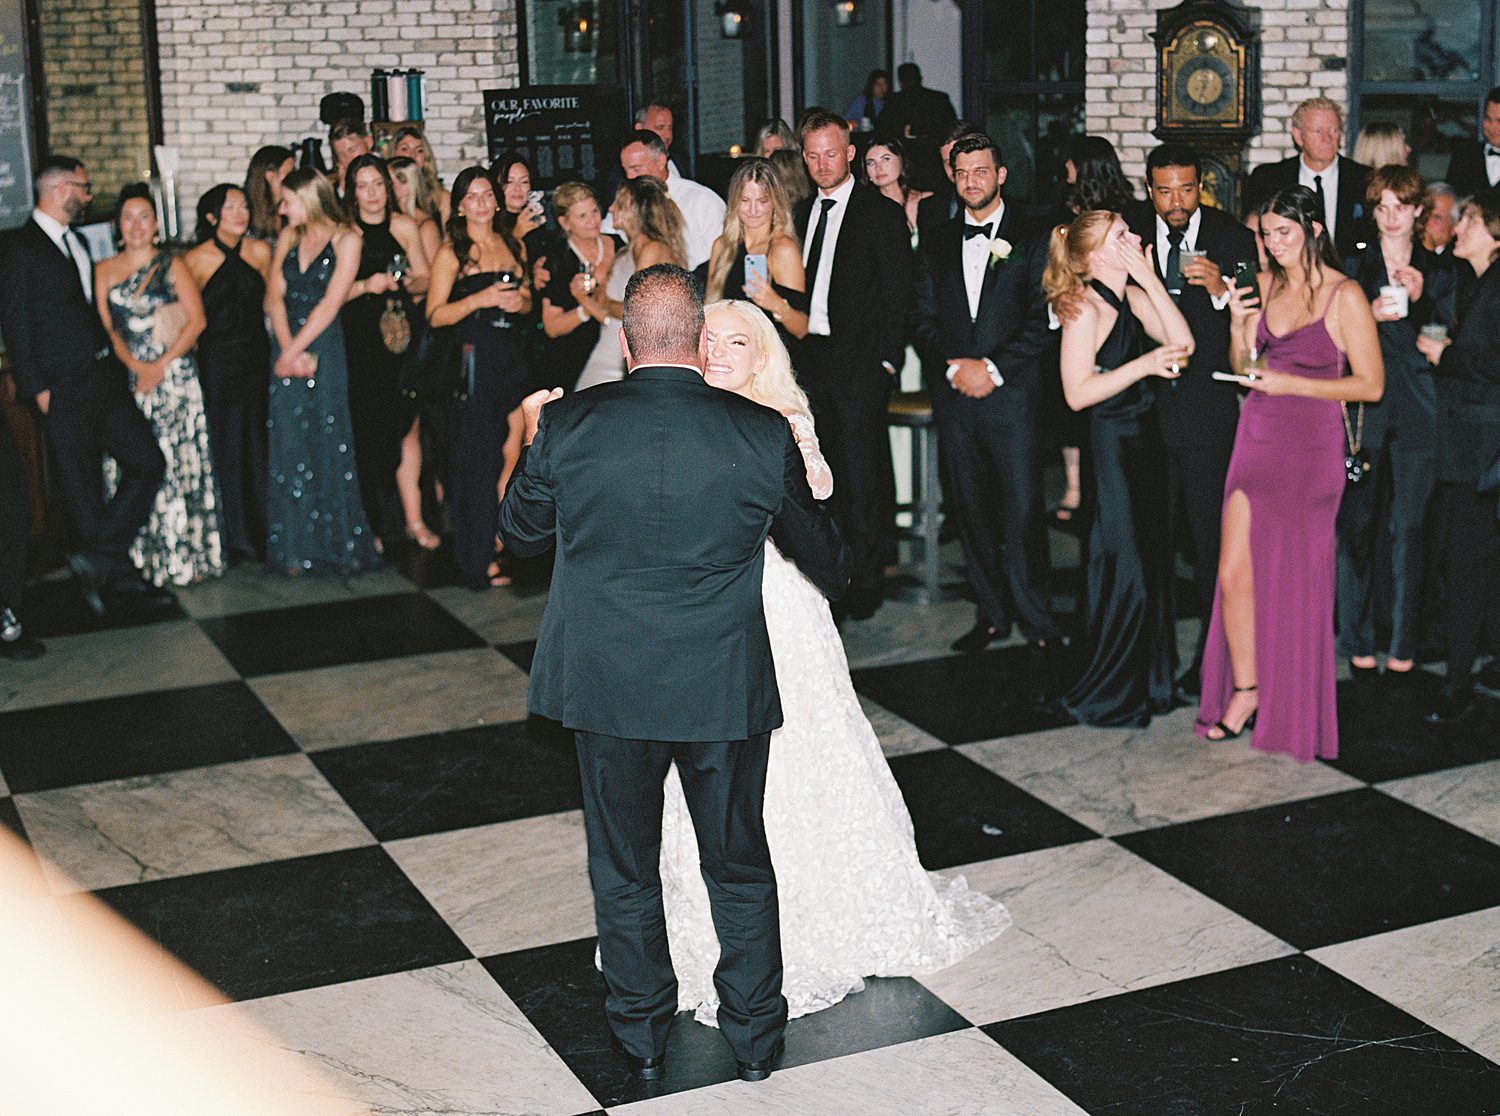 newlyweds dance on checkered floor at the Oxford Exchange